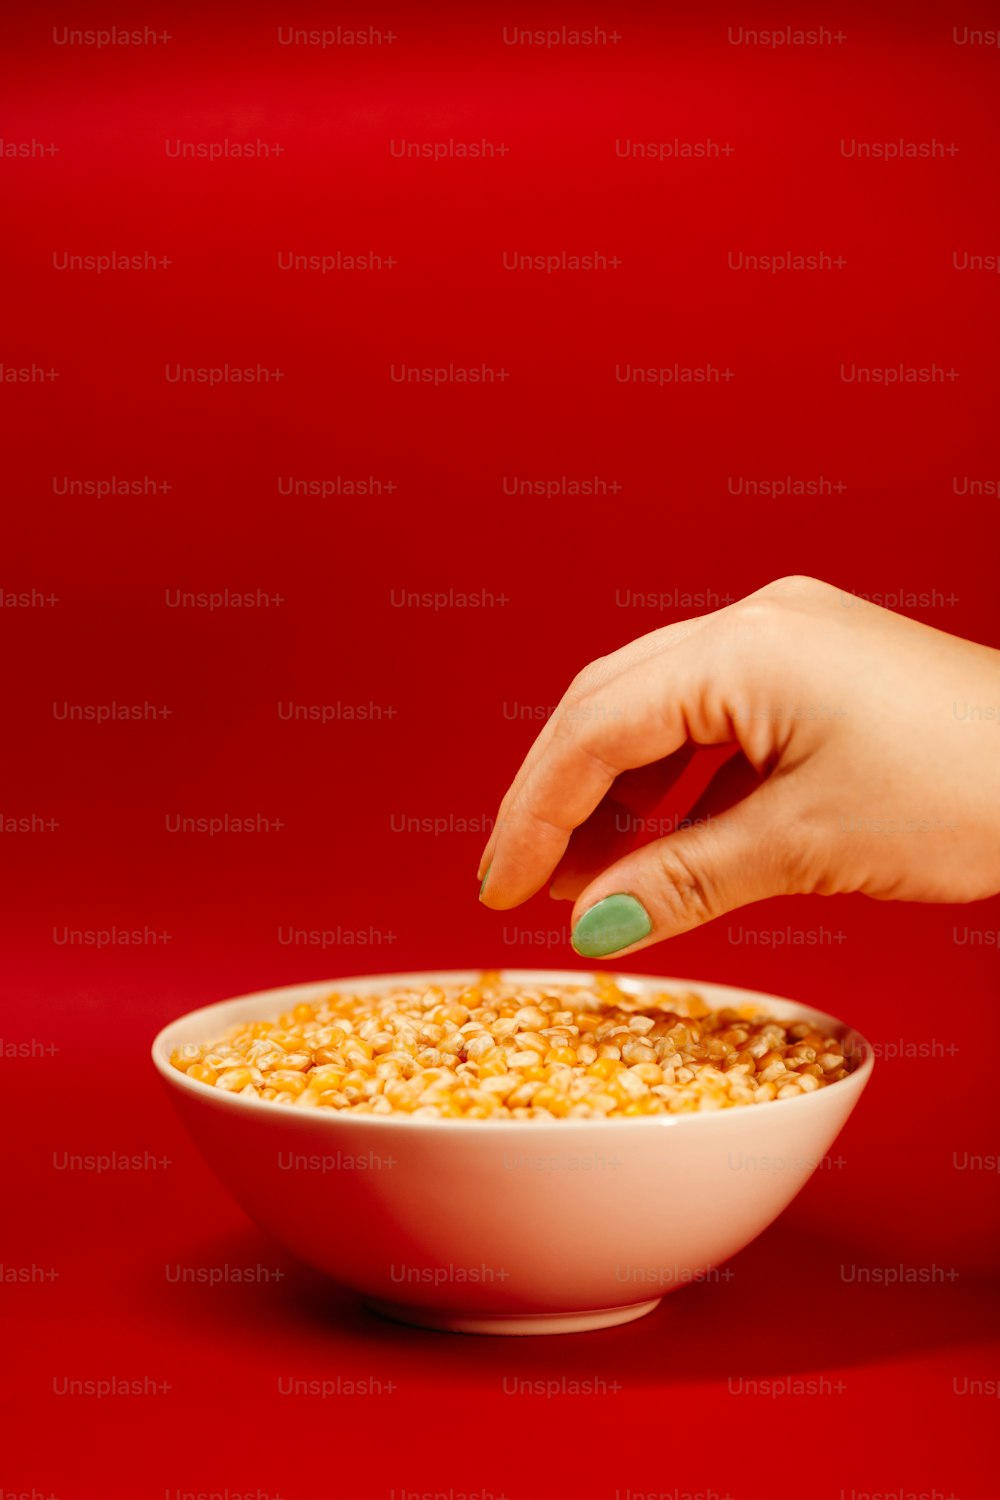 a woman's hand reaching into a bowl of corn